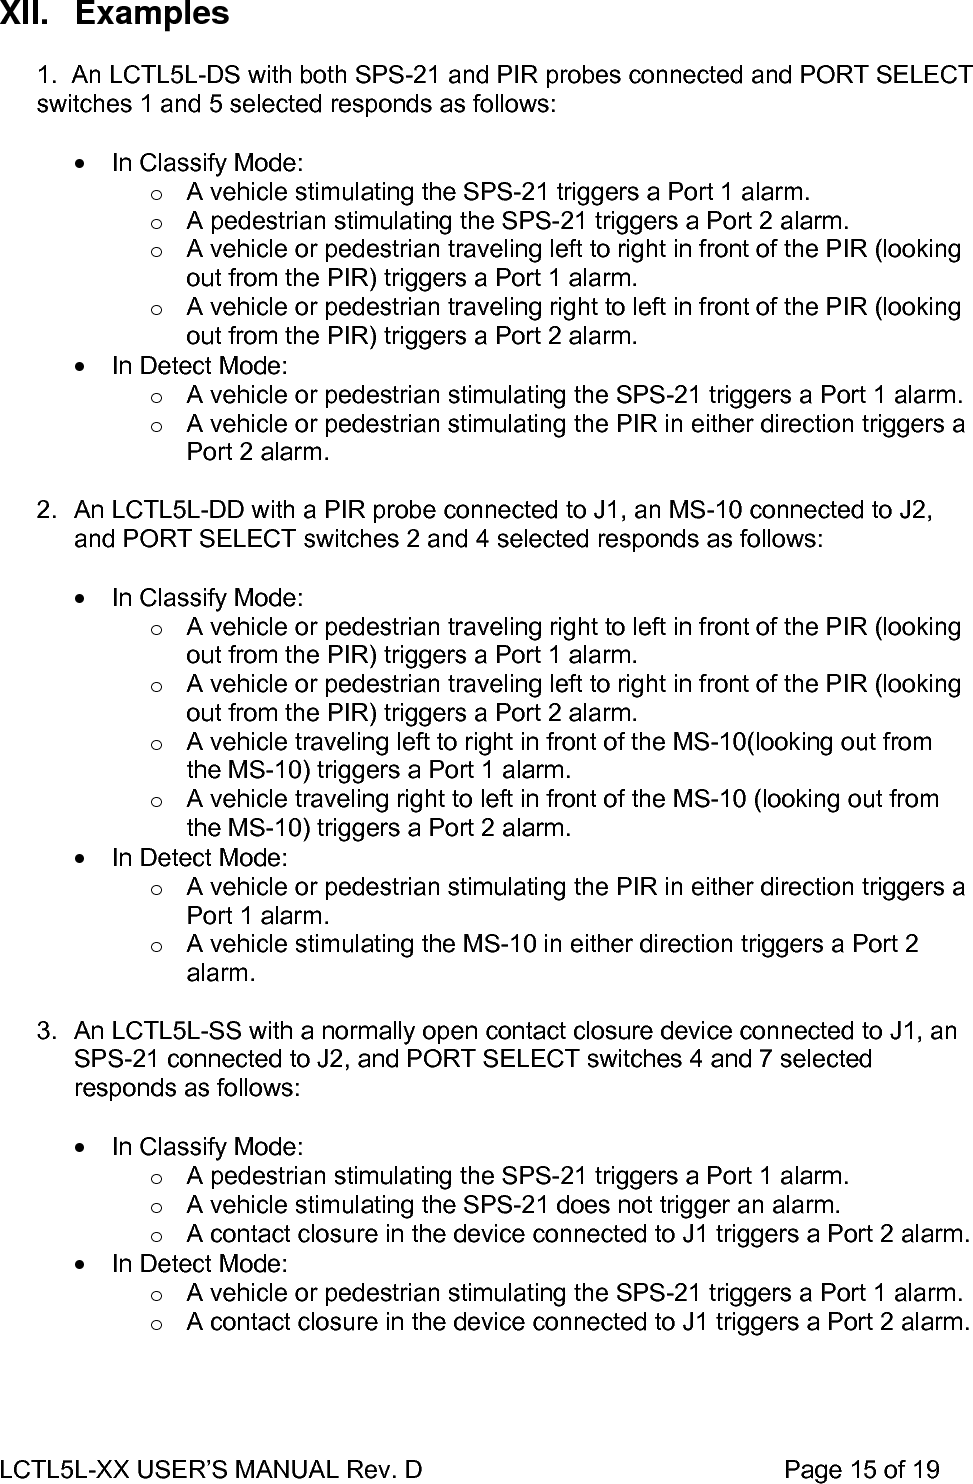 LCTL5L-XX USER’S MANUAL Rev. D                                                    Page 15 of 19  XII. Examples  1.  An LCTL5L-DS with both SPS-21 and PIR probes connected and PORT SELECT switches 1 and 5 selected responds as follows:  •  In Classify Mode: o  A vehicle stimulating the SPS-21 triggers a Port 1 alarm. o  A pedestrian stimulating the SPS-21 triggers a Port 2 alarm. o  A vehicle or pedestrian traveling left to right in front of the PIR (looking out from the PIR) triggers a Port 1 alarm. o  A vehicle or pedestrian traveling right to left in front of the PIR (looking out from the PIR) triggers a Port 2 alarm. •  In Detect Mode: o  A vehicle or pedestrian stimulating the SPS-21 triggers a Port 1 alarm. o  A vehicle or pedestrian stimulating the PIR in either direction triggers a Port 2 alarm.  2.  An LCTL5L-DD with a PIR probe connected to J1, an MS-10 connected to J2, and PORT SELECT switches 2 and 4 selected responds as follows:  •  In Classify Mode: o  A vehicle or pedestrian traveling right to left in front of the PIR (looking out from the PIR) triggers a Port 1 alarm. o  A vehicle or pedestrian traveling left to right in front of the PIR (looking out from the PIR) triggers a Port 2 alarm. o  A vehicle traveling left to right in front of the MS-10(looking out from the MS-10) triggers a Port 1 alarm. o  A vehicle traveling right to left in front of the MS-10 (looking out from the MS-10) triggers a Port 2 alarm. •  In Detect Mode: o  A vehicle or pedestrian stimulating the PIR in either direction triggers a Port 1 alarm. o  A vehicle stimulating the MS-10 in either direction triggers a Port 2 alarm.  3.  An LCTL5L-SS with a normally open contact closure device connected to J1, an SPS-21 connected to J2, and PORT SELECT switches 4 and 7 selected responds as follows:  •  In Classify Mode: o  A pedestrian stimulating the SPS-21 triggers a Port 1 alarm. o  A vehicle stimulating the SPS-21 does not trigger an alarm. o  A contact closure in the device connected to J1 triggers a Port 2 alarm. •  In Detect Mode: o  A vehicle or pedestrian stimulating the SPS-21 triggers a Port 1 alarm. o  A contact closure in the device connected to J1 triggers a Port 2 alarm.  